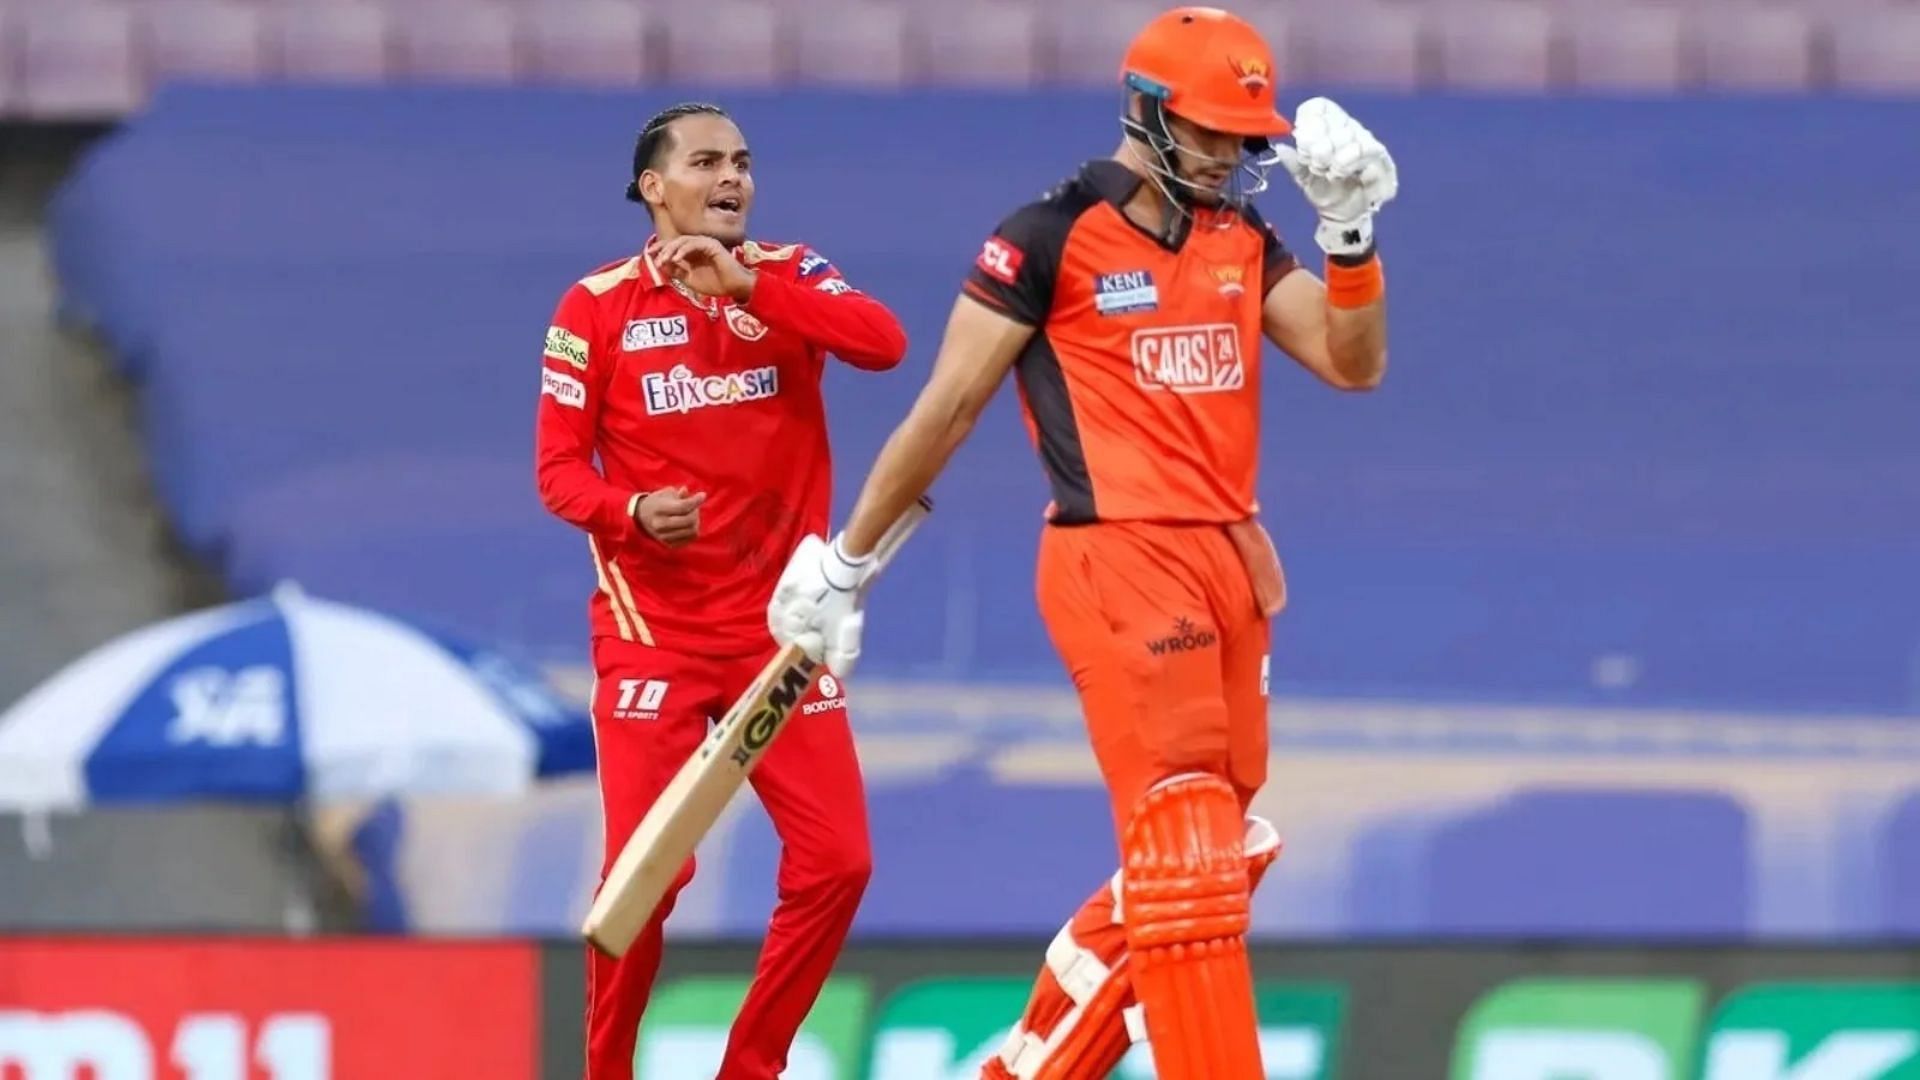 Can Aiden Markram(right) help SRH get their first win of the season?